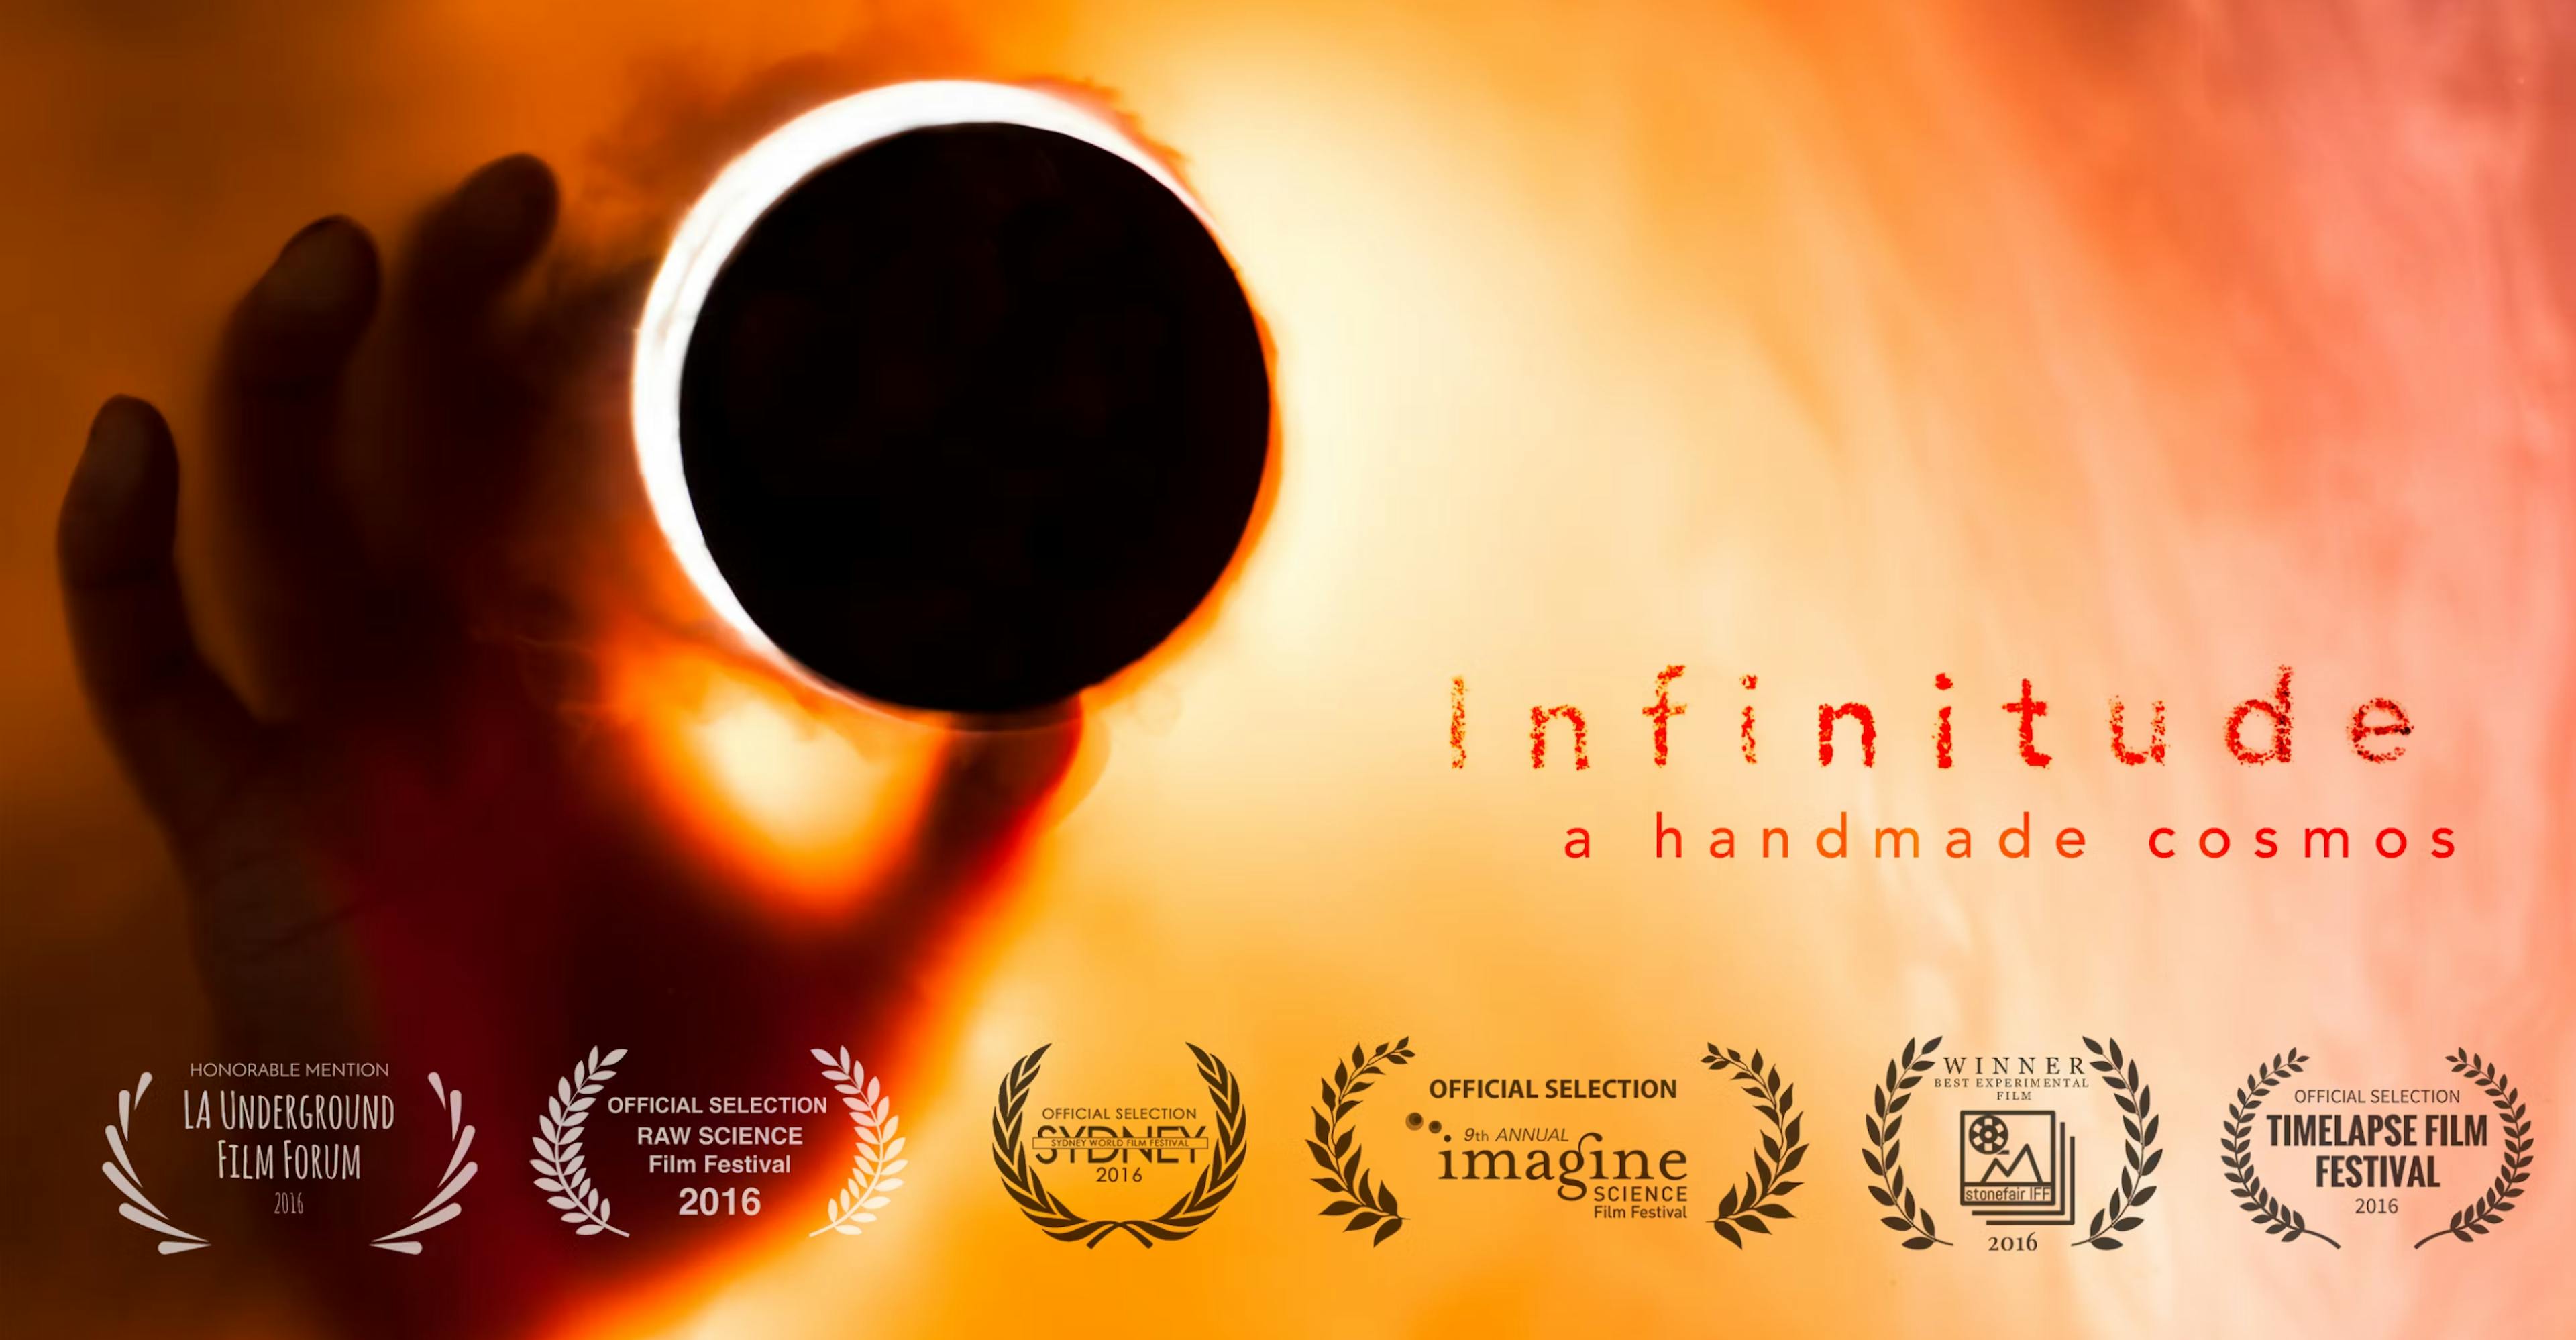 orange and red watercolour background, silhouette of a hand holding an eclipse on the left side of the screen. Text reads, "infinitude a handmade cosmos"